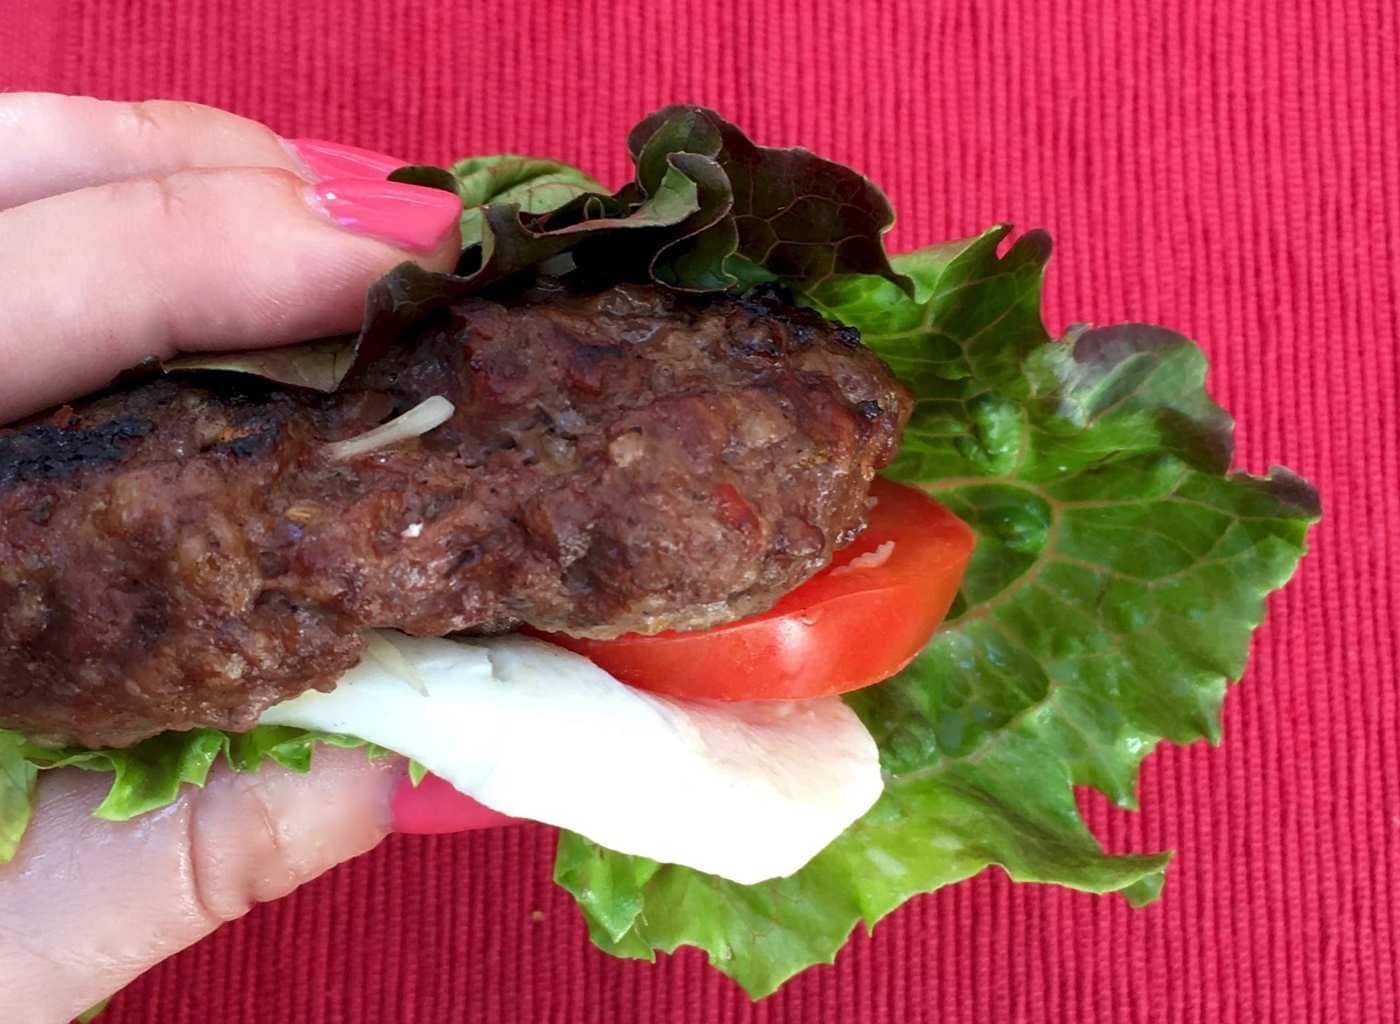 Burger assembled in lettuce wrap with red background.